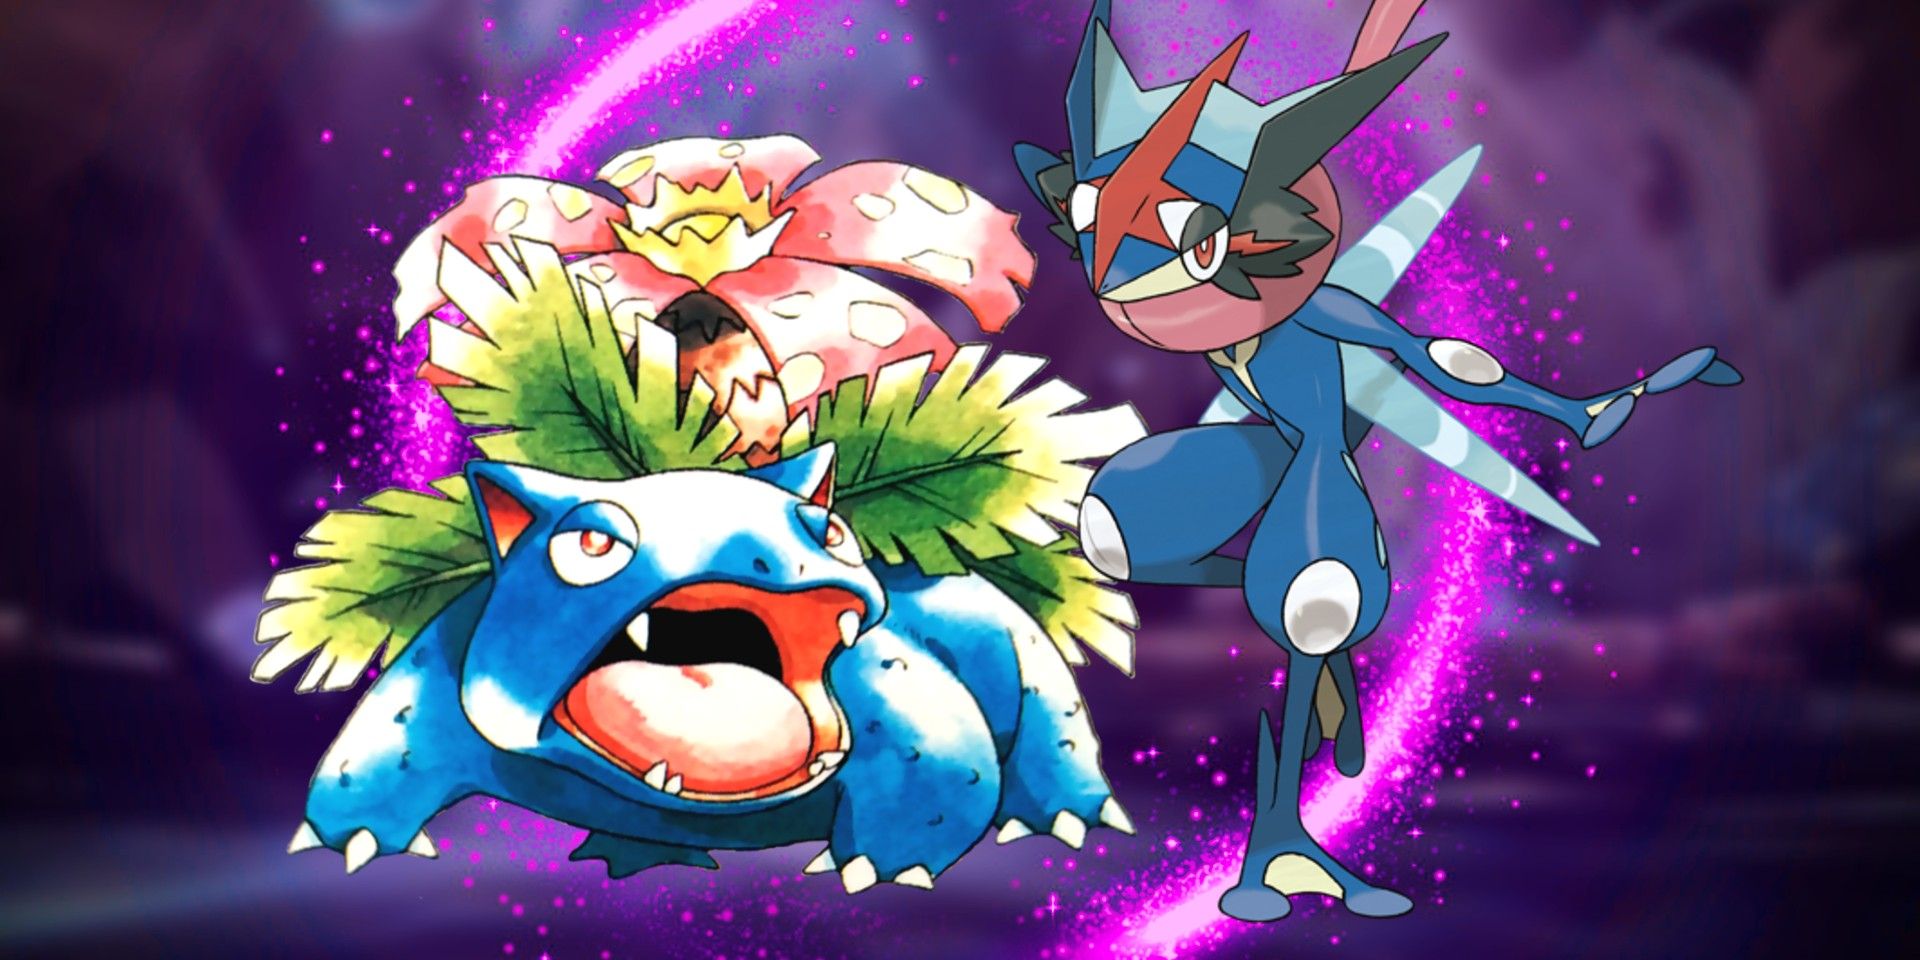 Pokemon Scarlet and Violet's Tera Raid cavern blurred-out in the background with a Venusaur featured on the left and Ash's Greninja on the right. Immediately behind the Pokémon is a circling purple energy, representing the Poison Tera type.